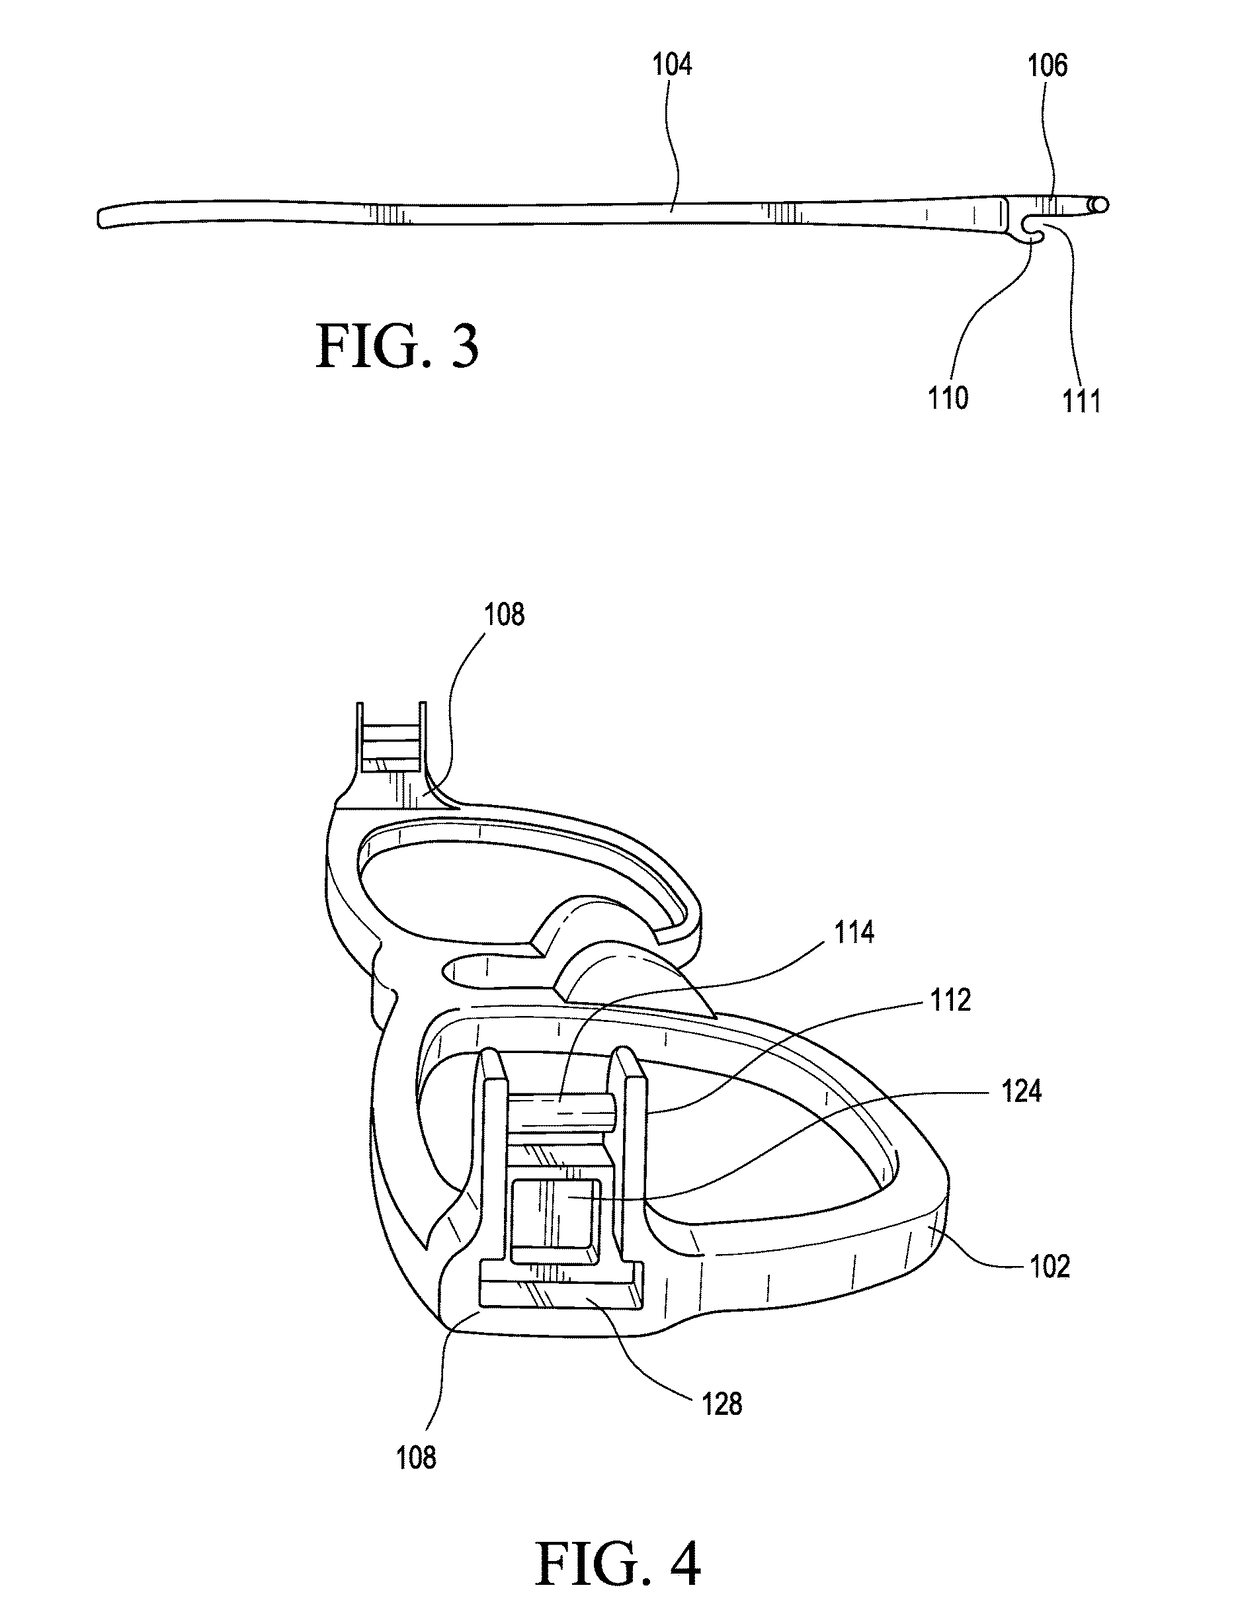 Eyeglasses assembly comprising frame and interchangeable side pieces